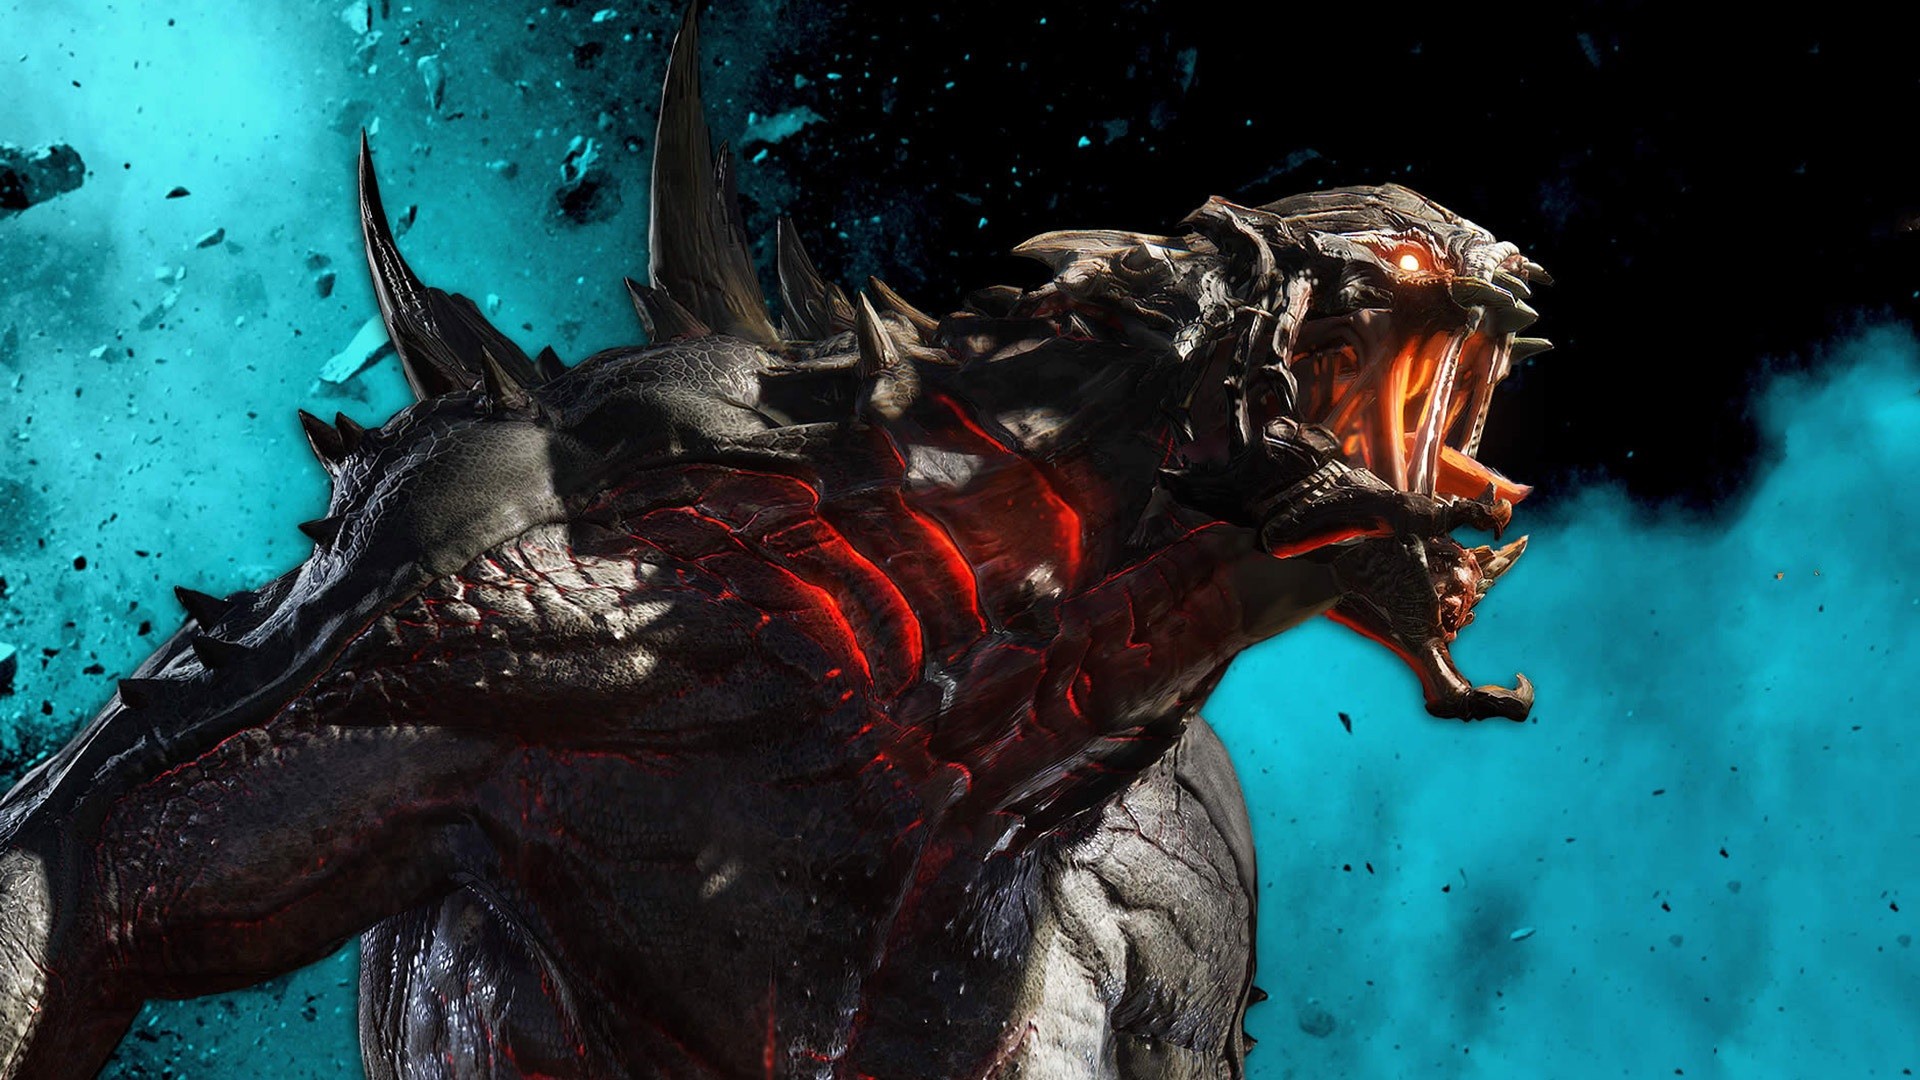 General 1920x1080 Evolve video games PlayStation 4 Xbox One cyan creature video game art